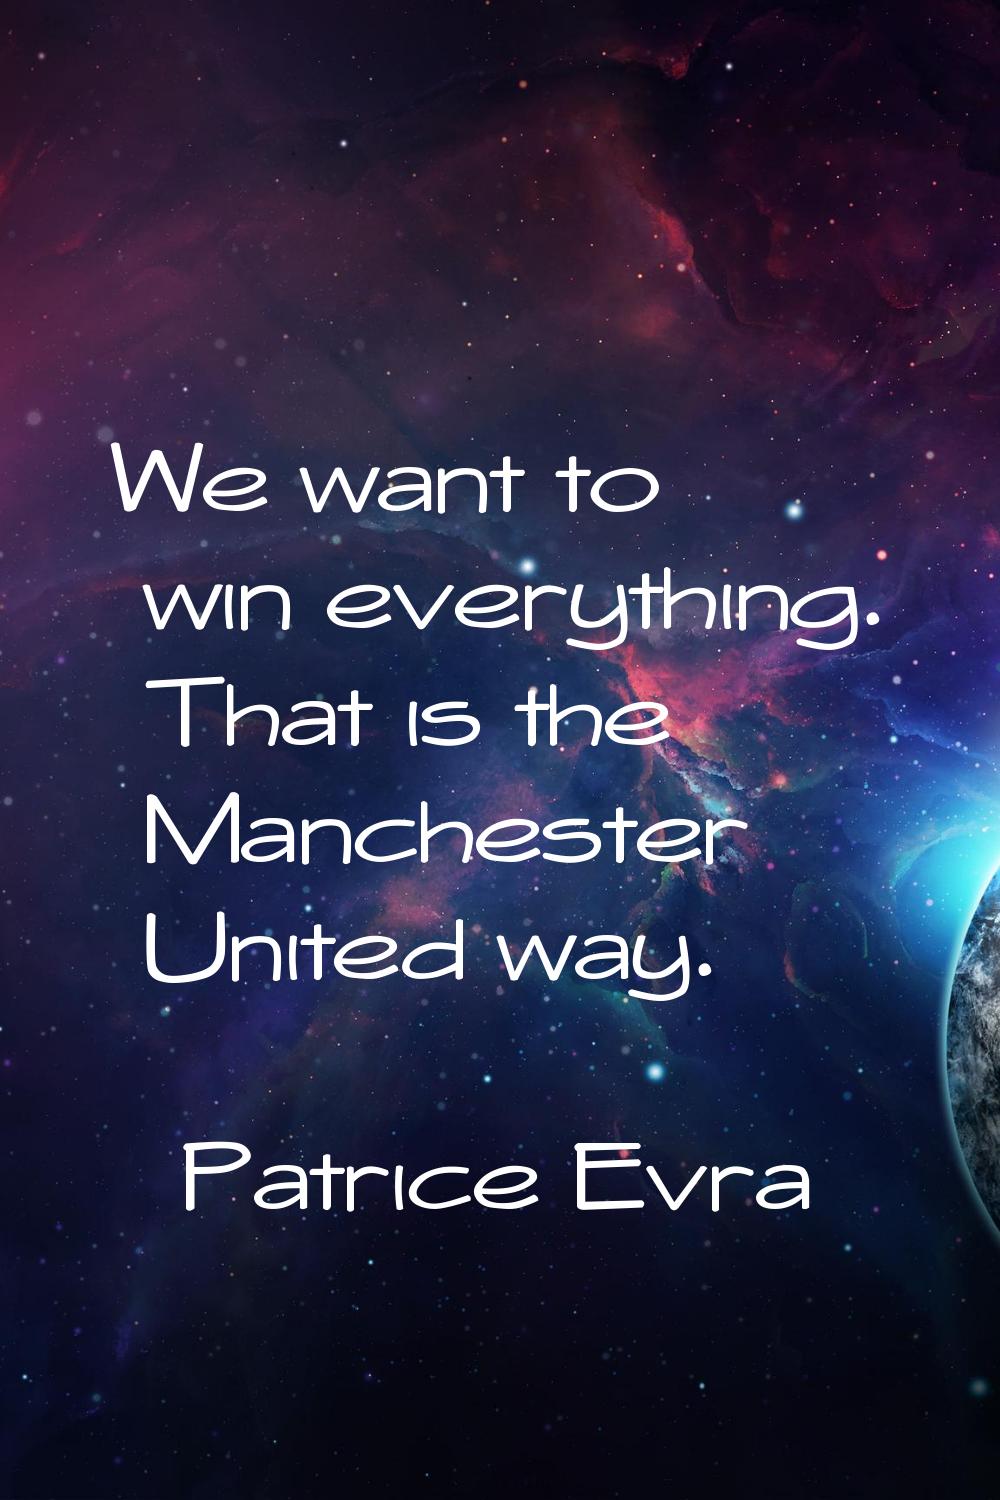 We want to win everything. That is the Manchester United way.